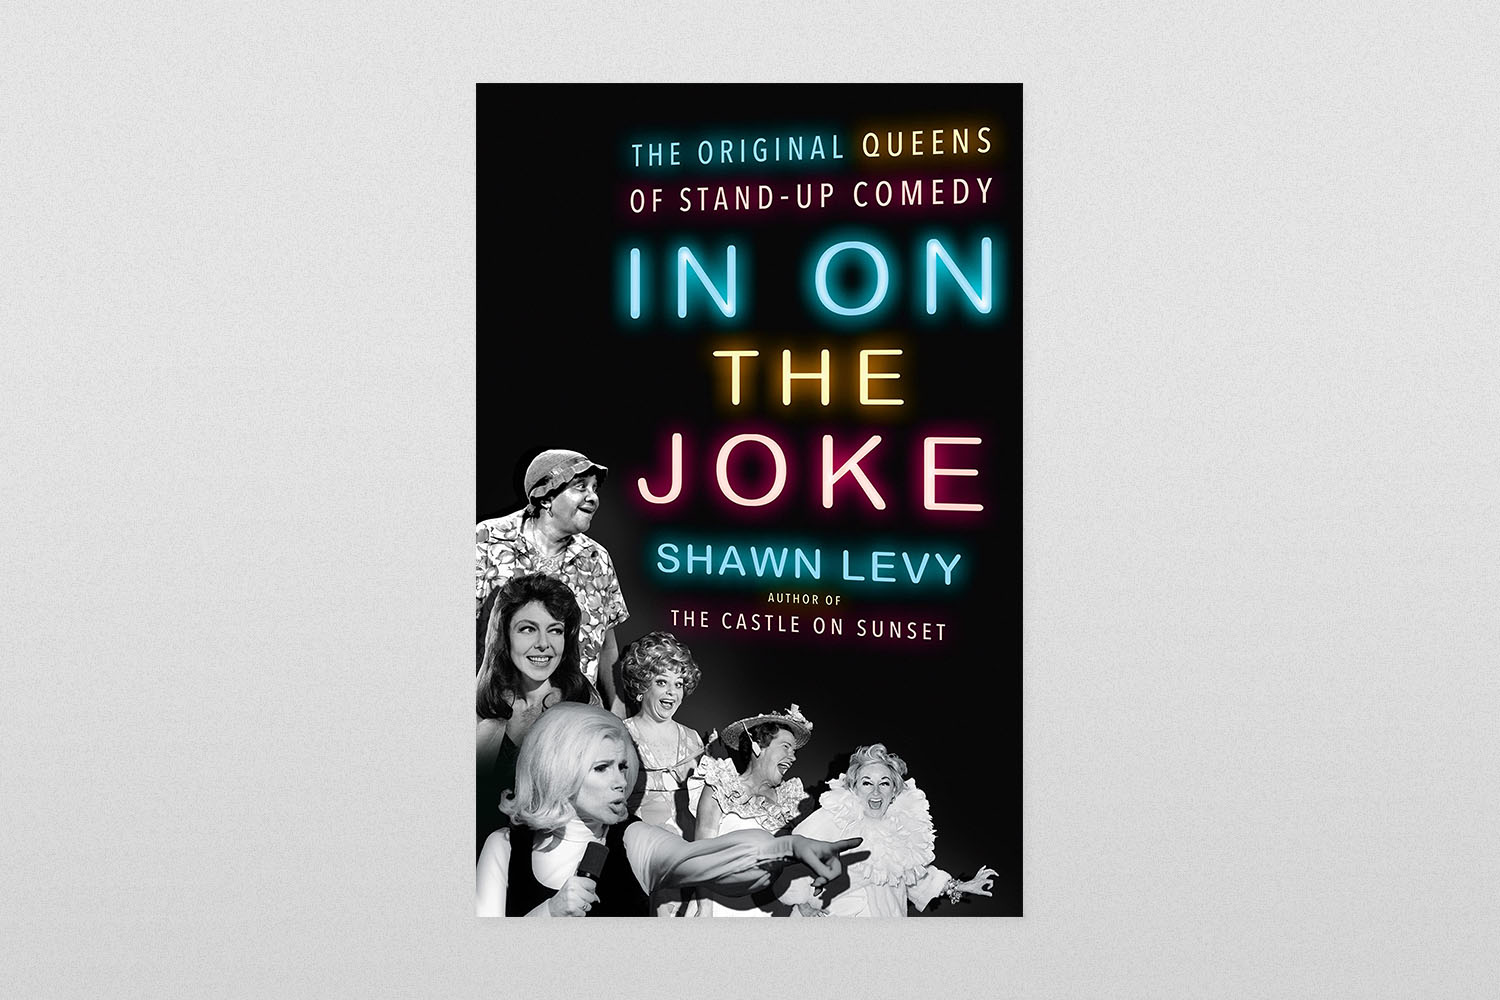 In on the Joke- The Original Queens of Standup Comedy by Shawn Levy